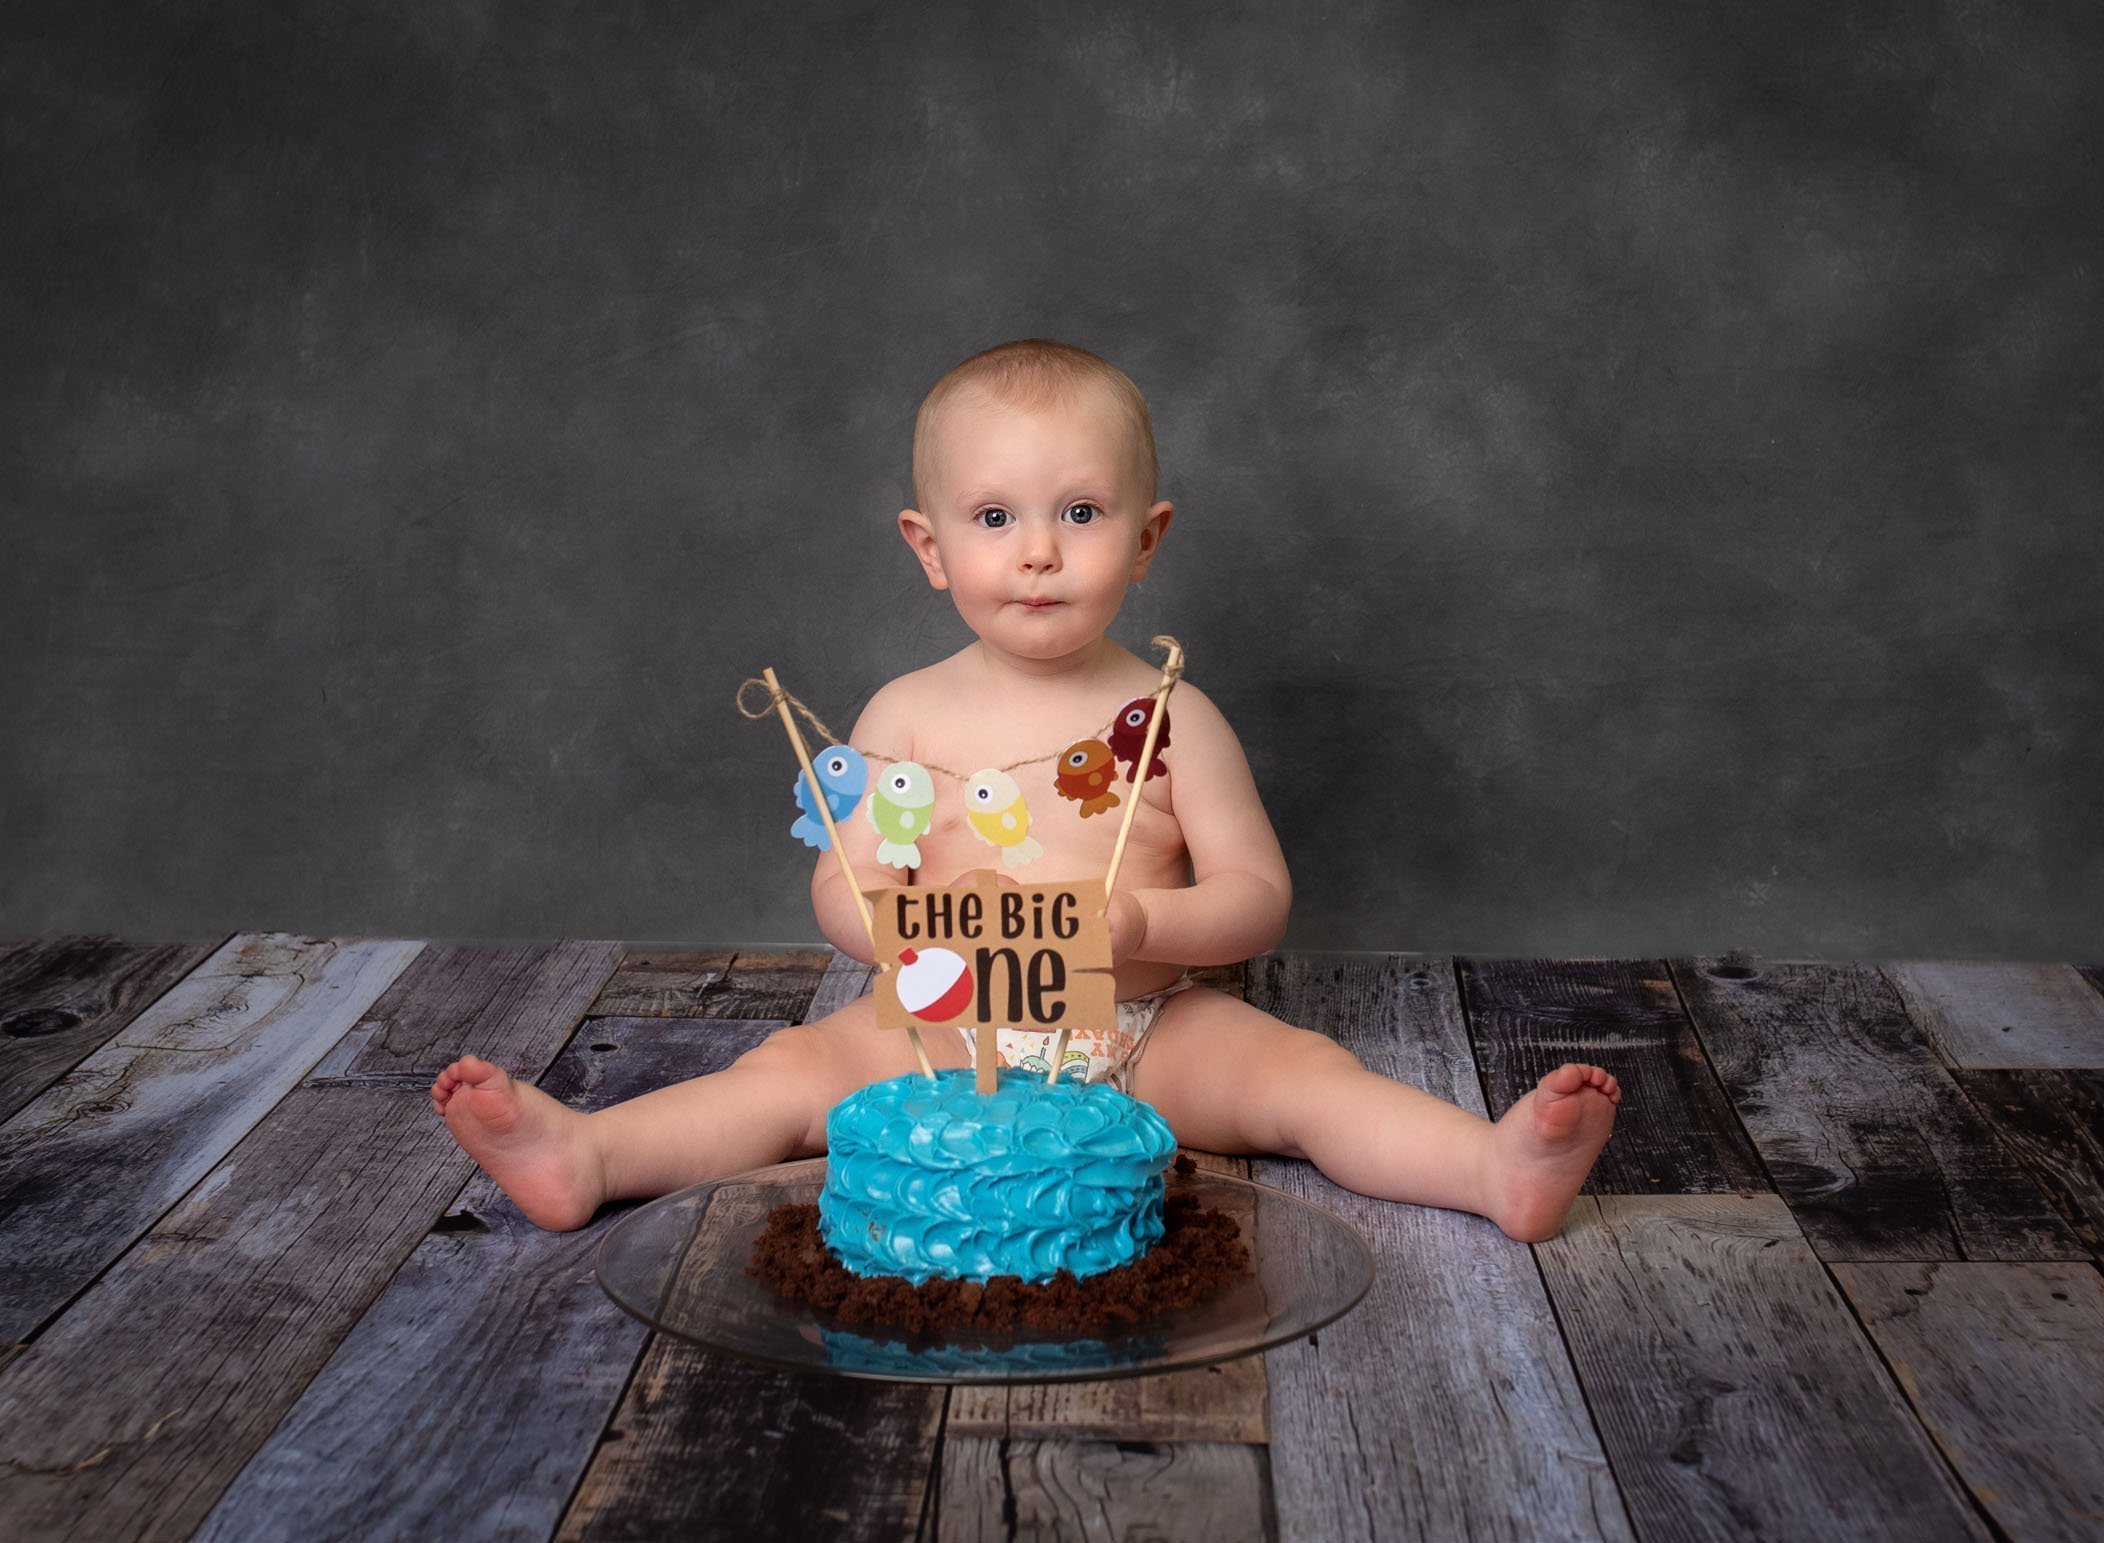 Family Photos and Cake Smash Session - Connecticut Photographer